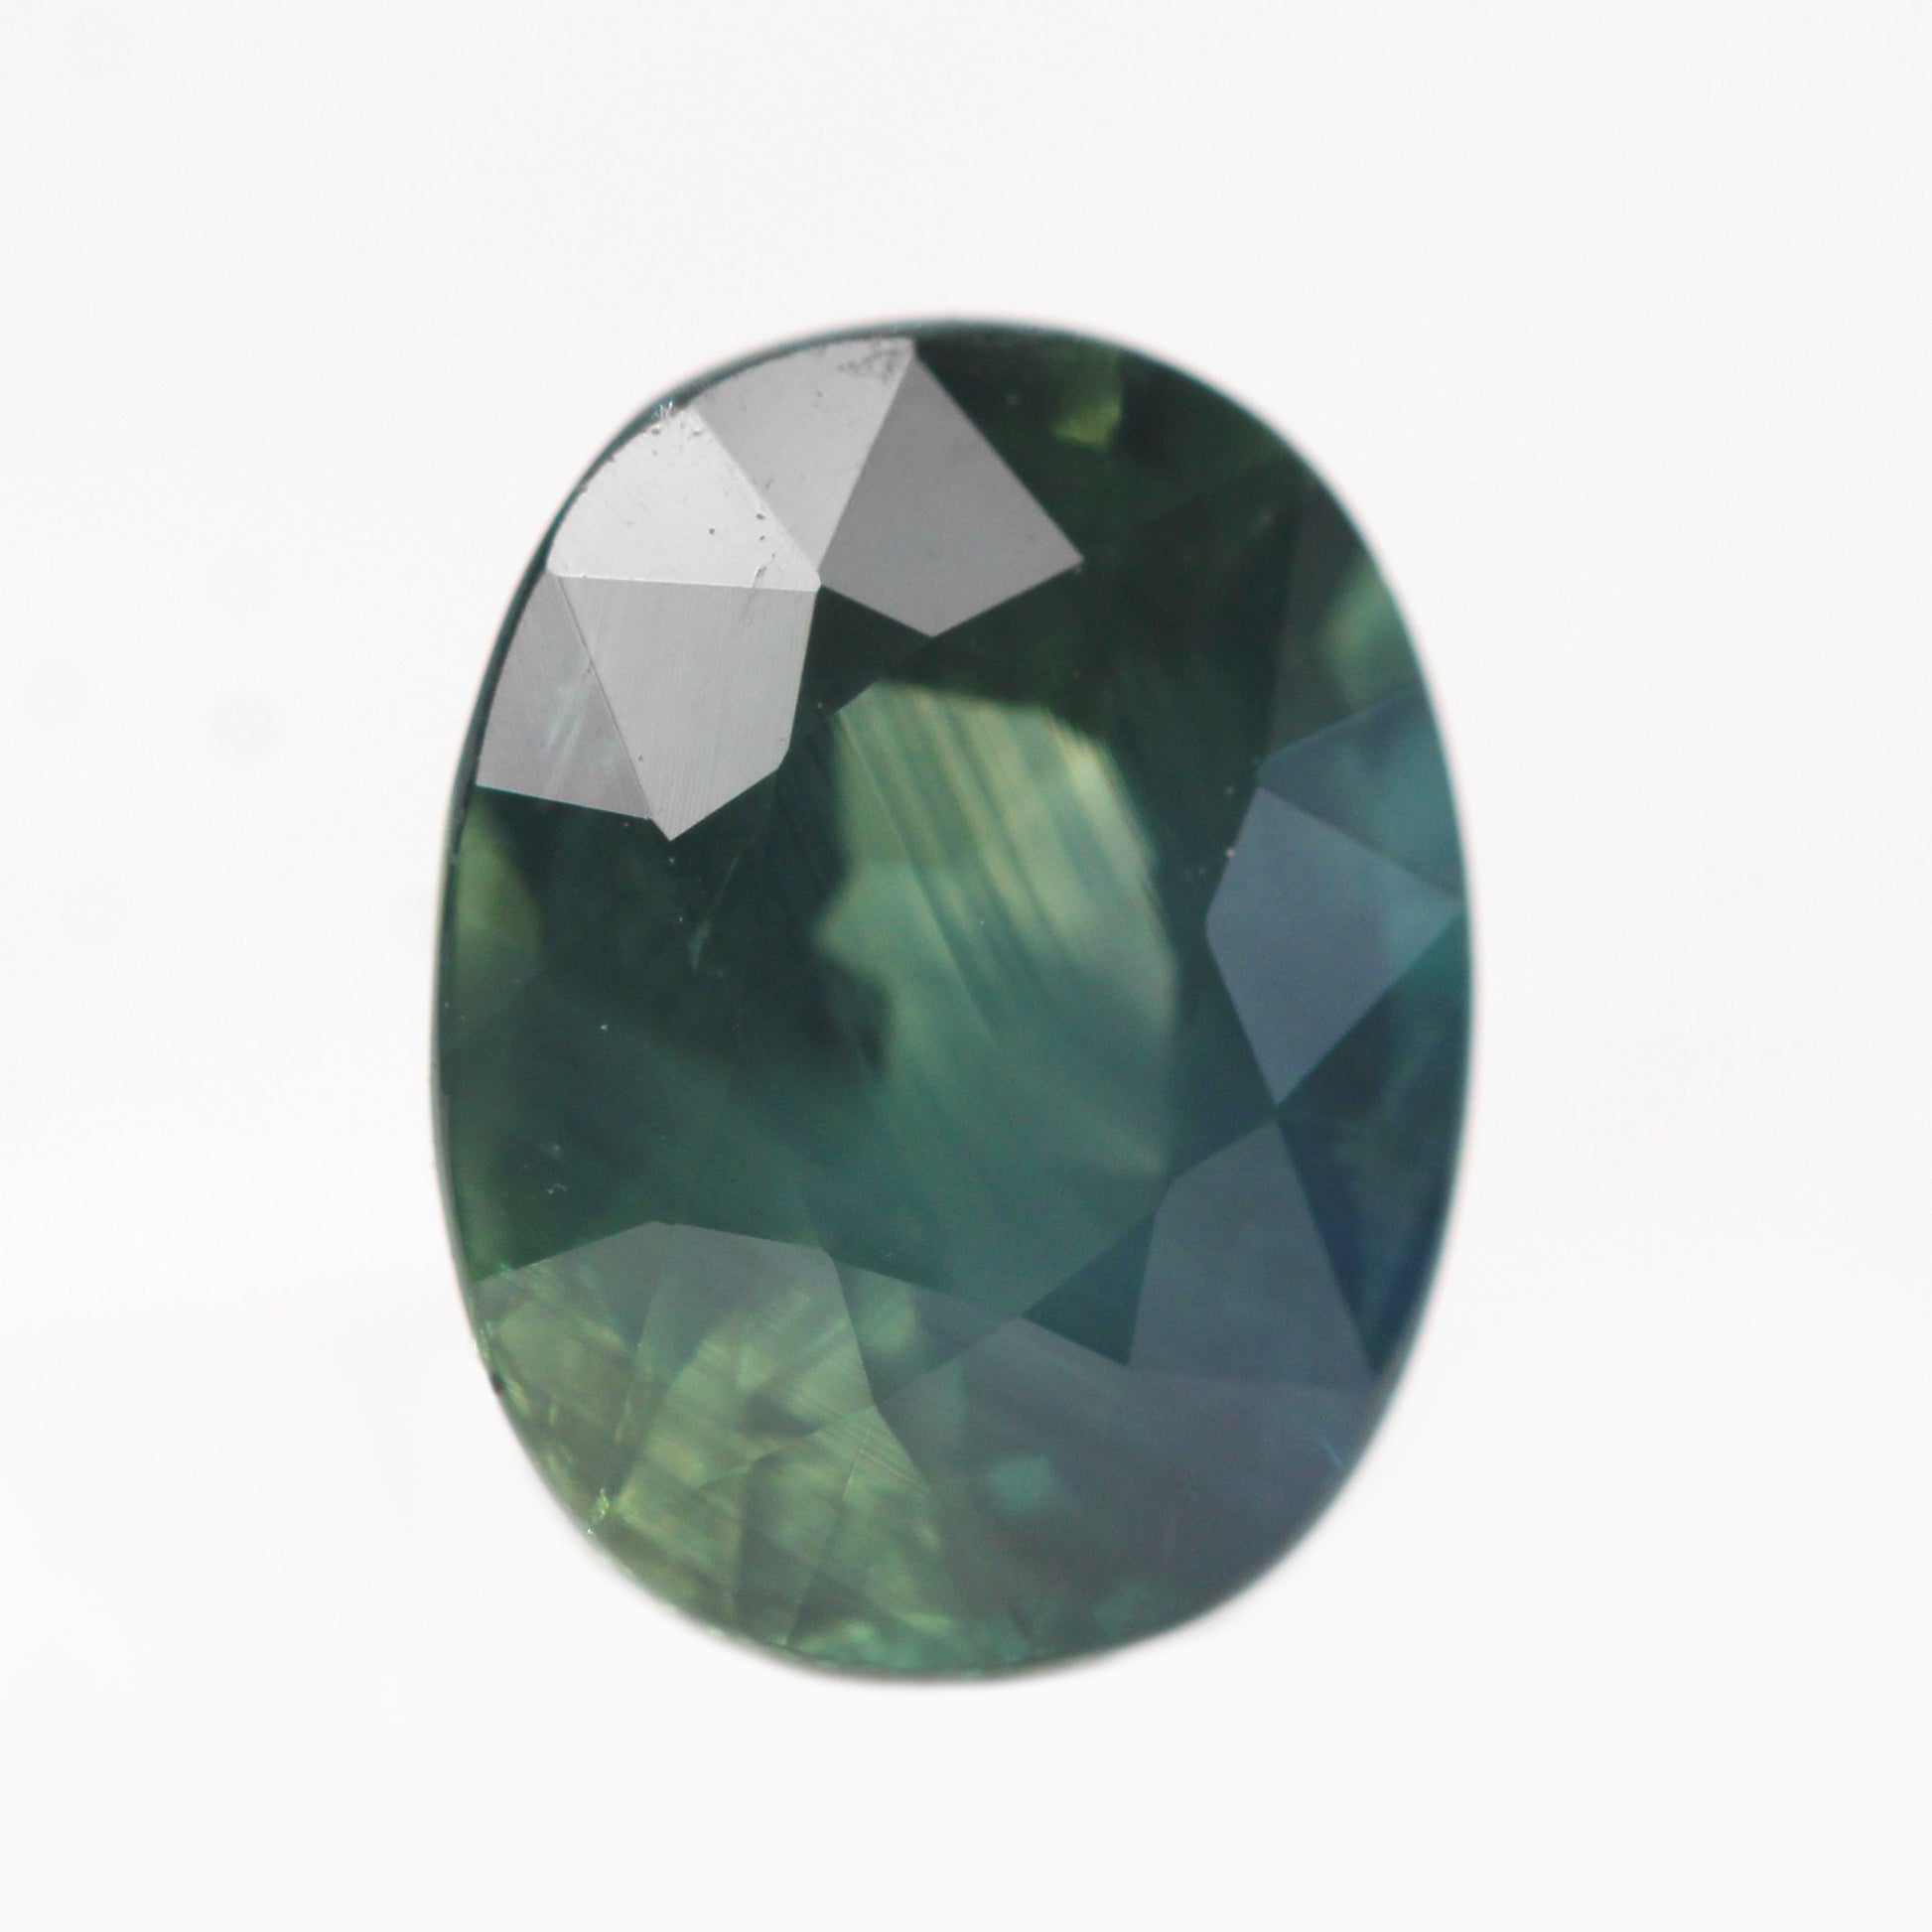 1.88 Carat Dark Teal Oval Sapphire for Custom Work - Inventory Code TOS188 - Midwinter Co. Alternative Bridal Rings and Modern Fine Jewelry